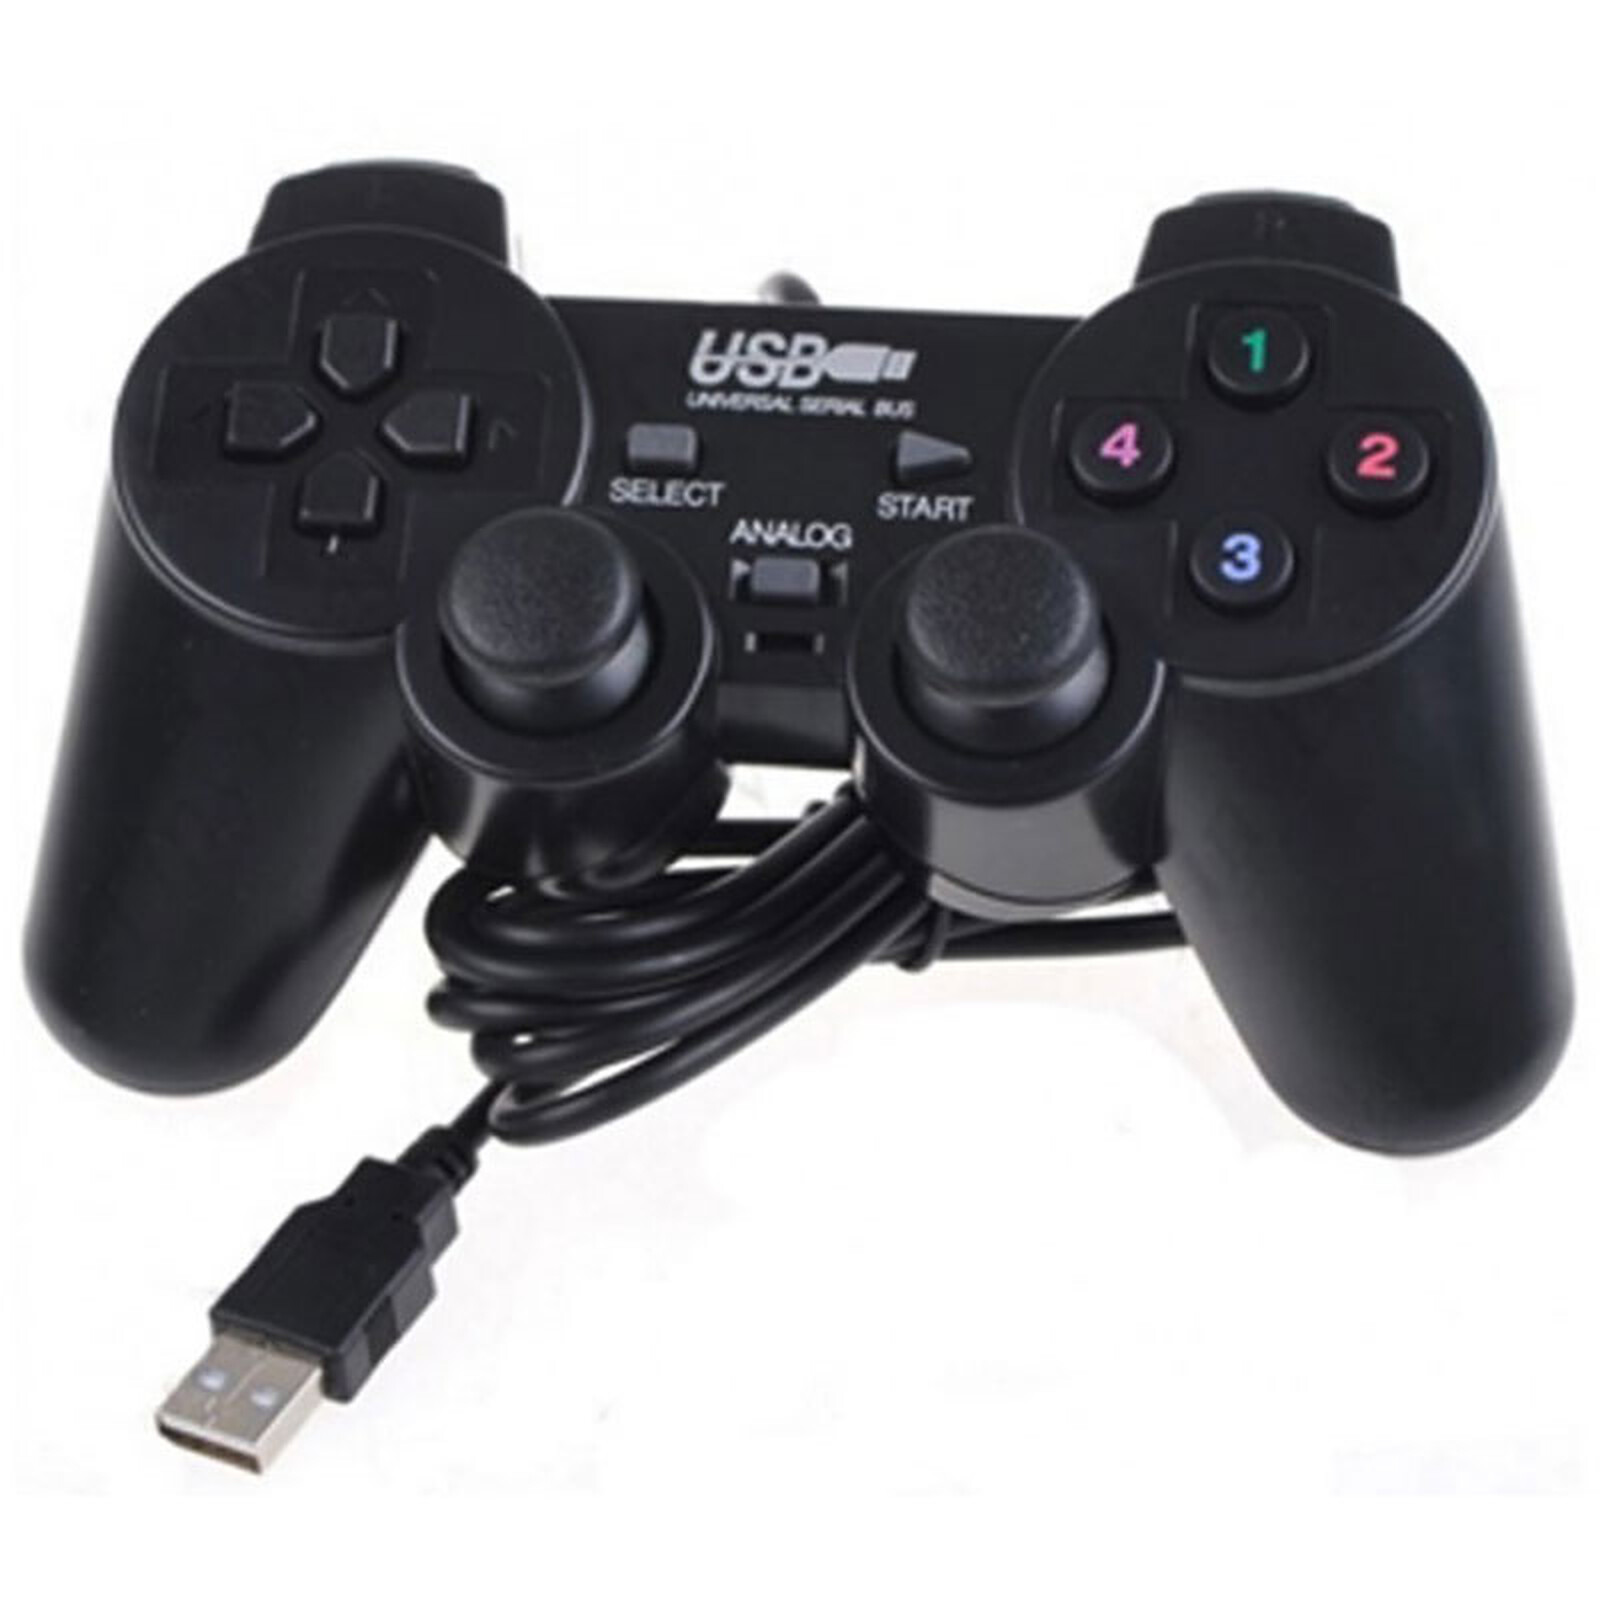 Sony PlayStation 4 DualShock USB Adapter for PC/Mac - Accessoires PS4 -  Garantie 3 ans LDLC